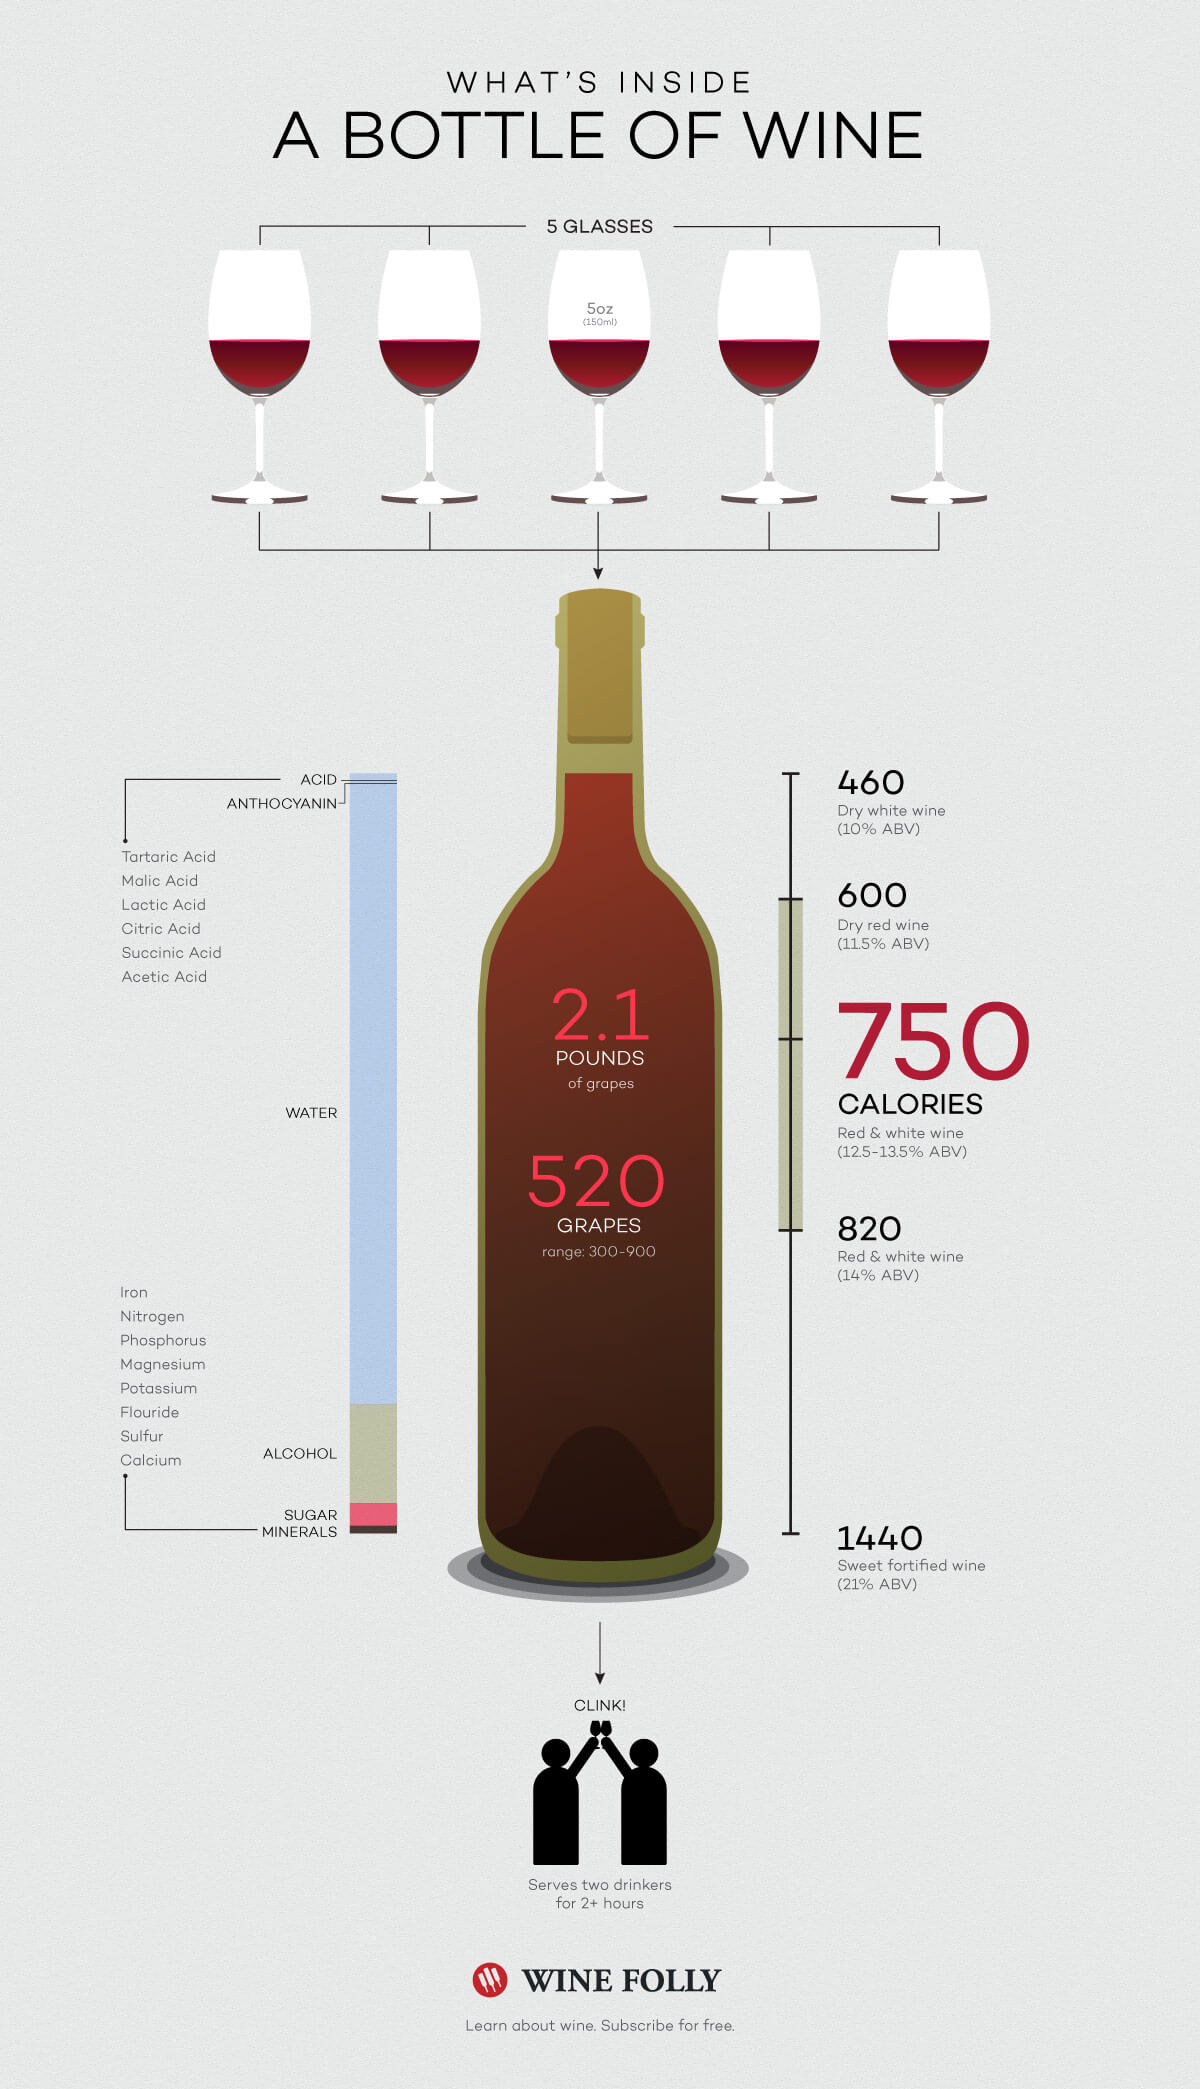 How Many Glasses Of Wine in a Bottle?